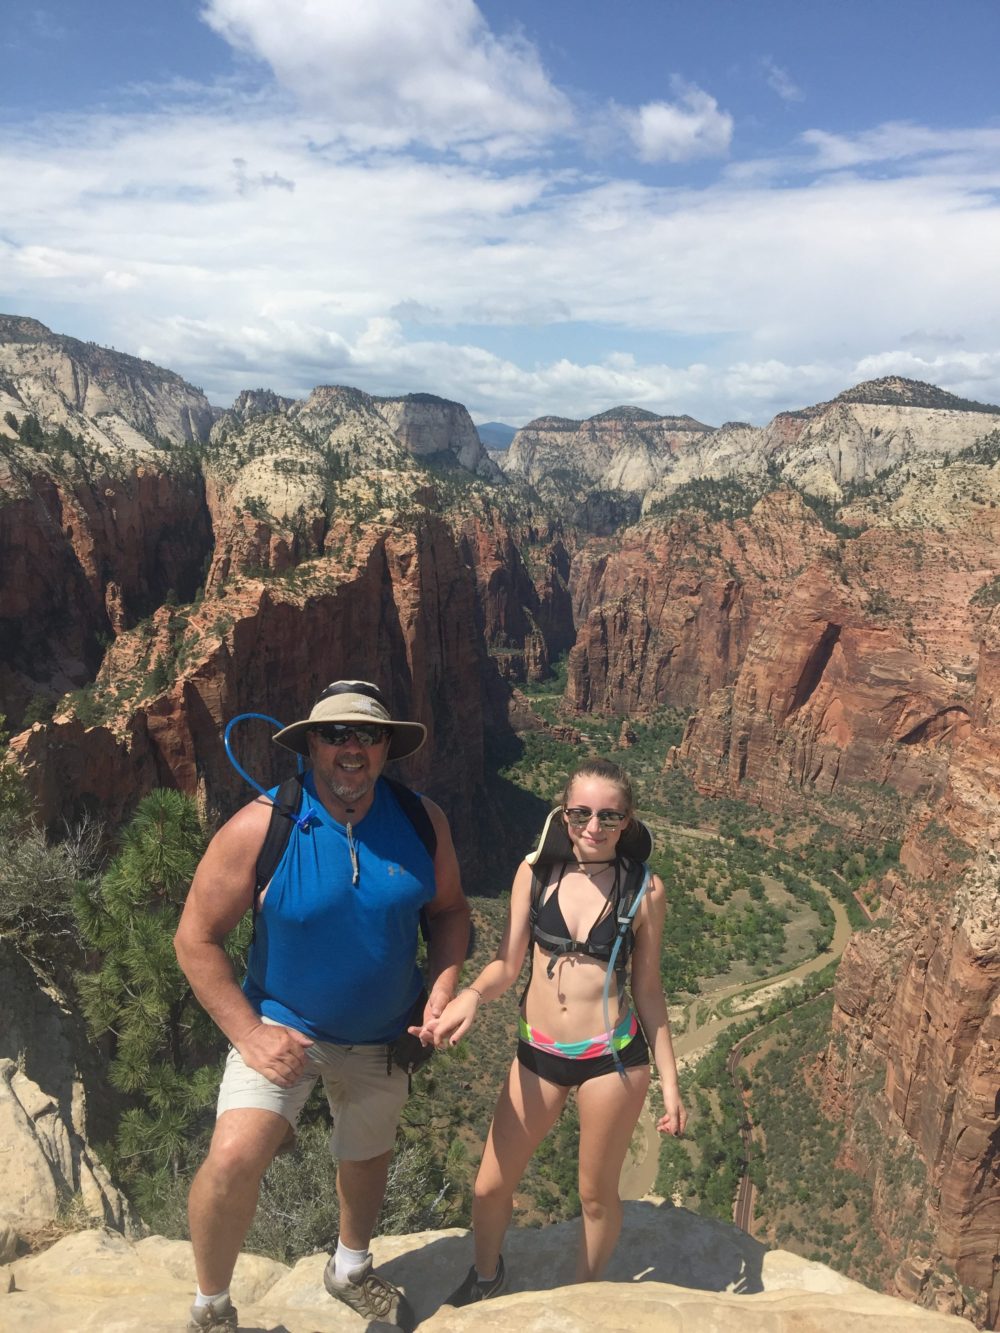 Melissa and Dwayne atop of Angel's Landing in Zion Canyon, Utah (Note that Dwayne has a fear of heights)